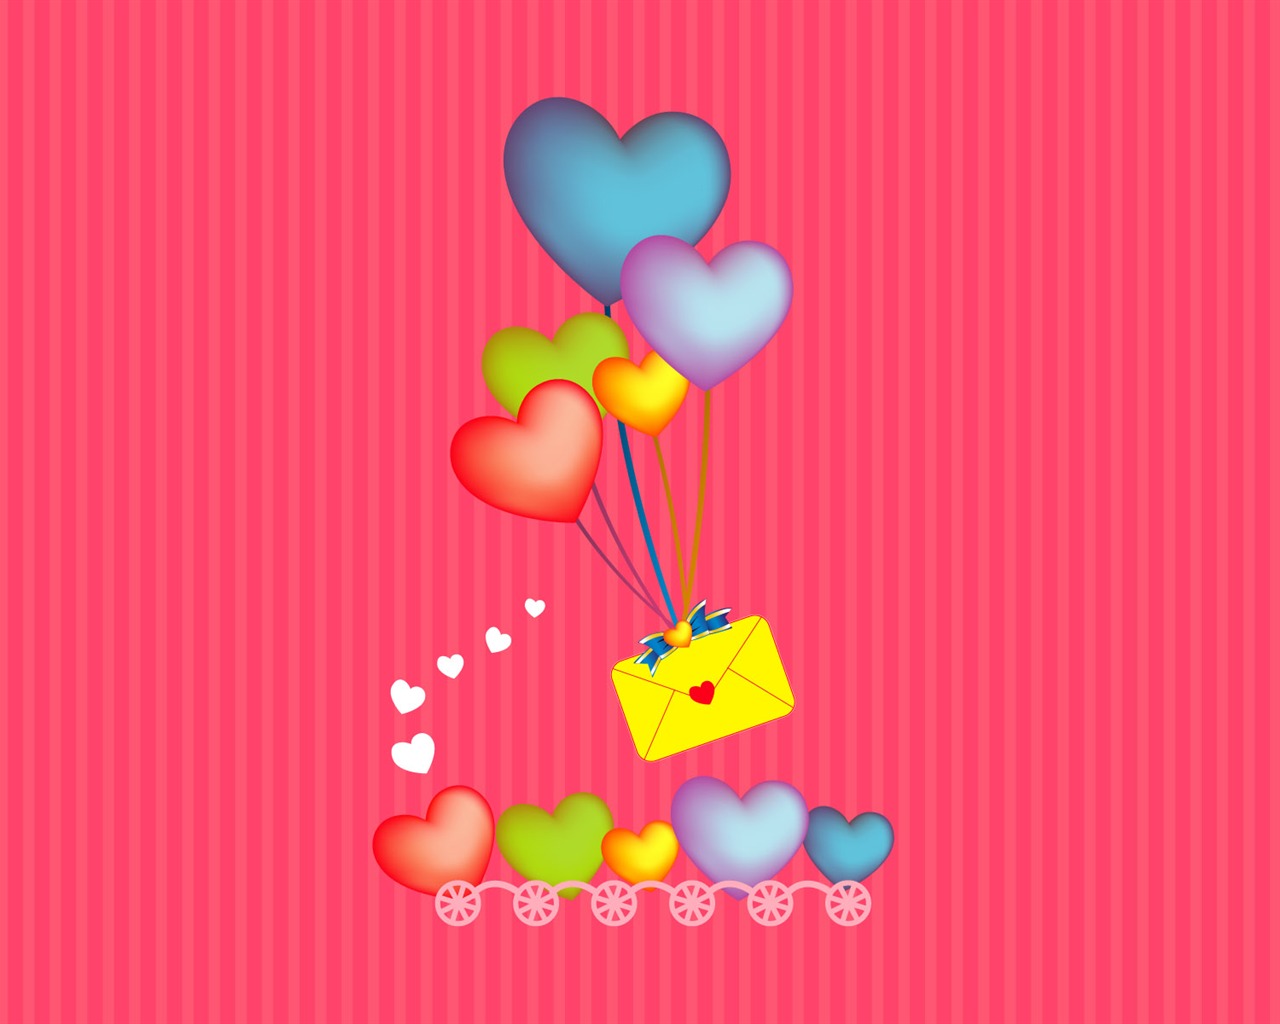 Valentine's Day Love Theme Wallpapers (2) #7 - 1280x1024